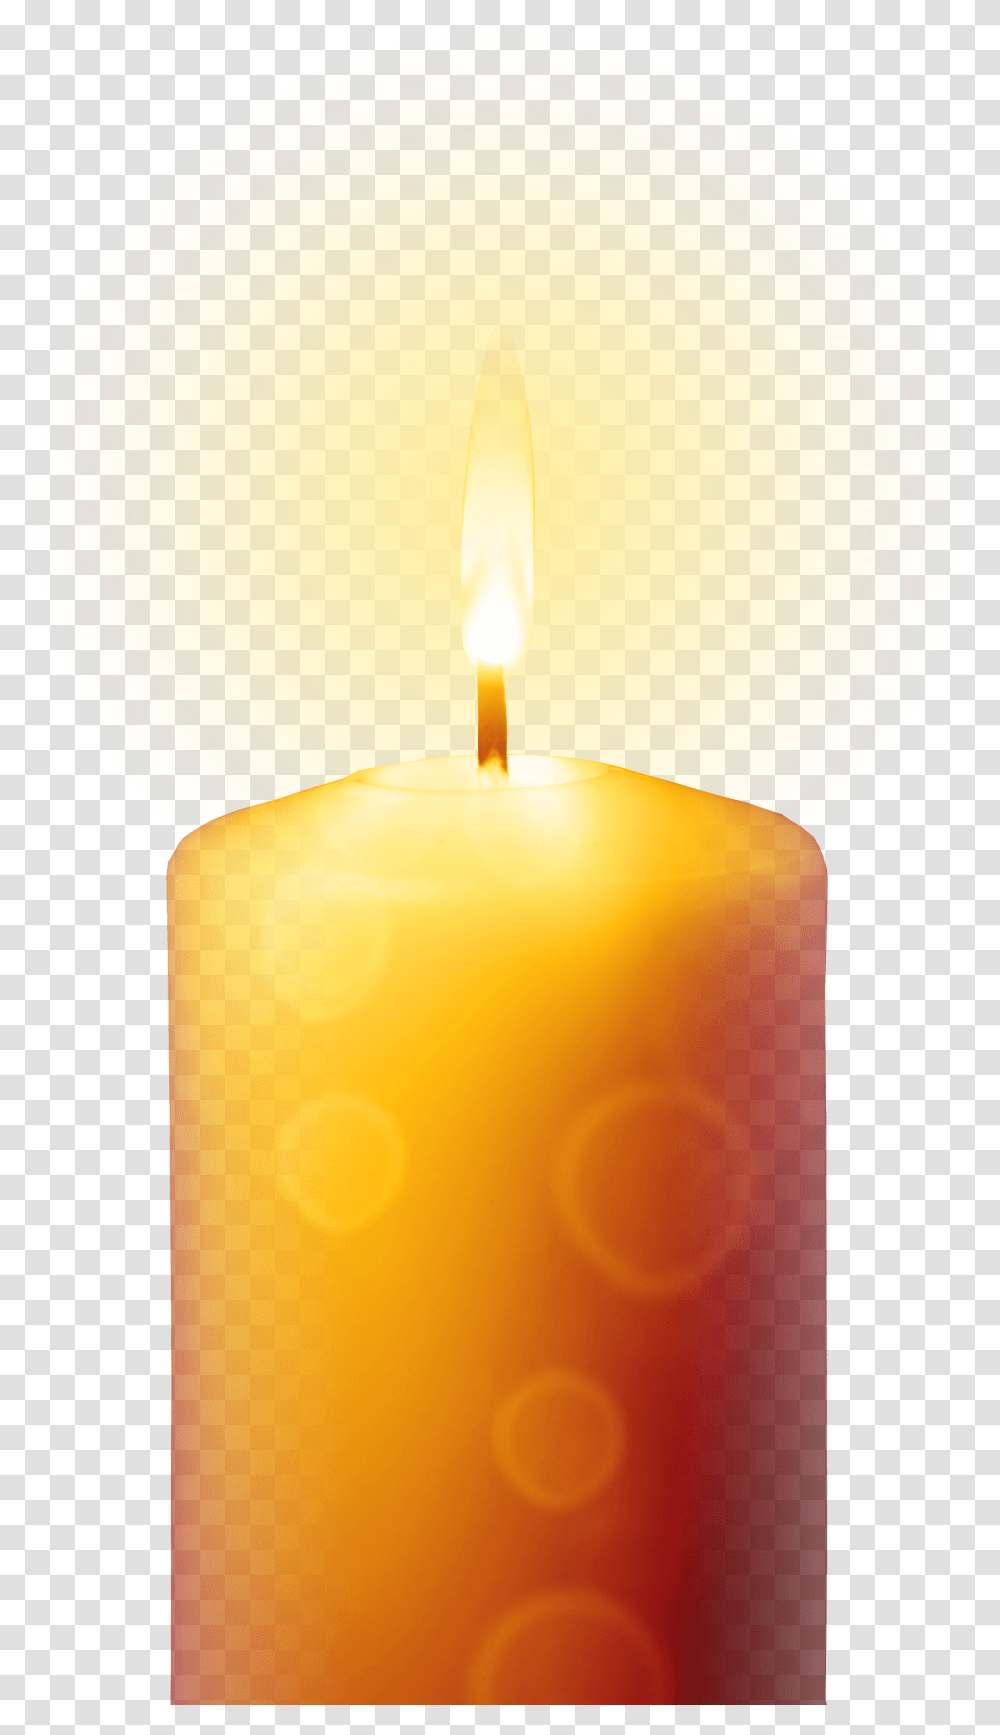 Download Hd Images Of Light Full Maps Locations Rest In Peace Candle, Lamp, Fire, Flame Transparent Png